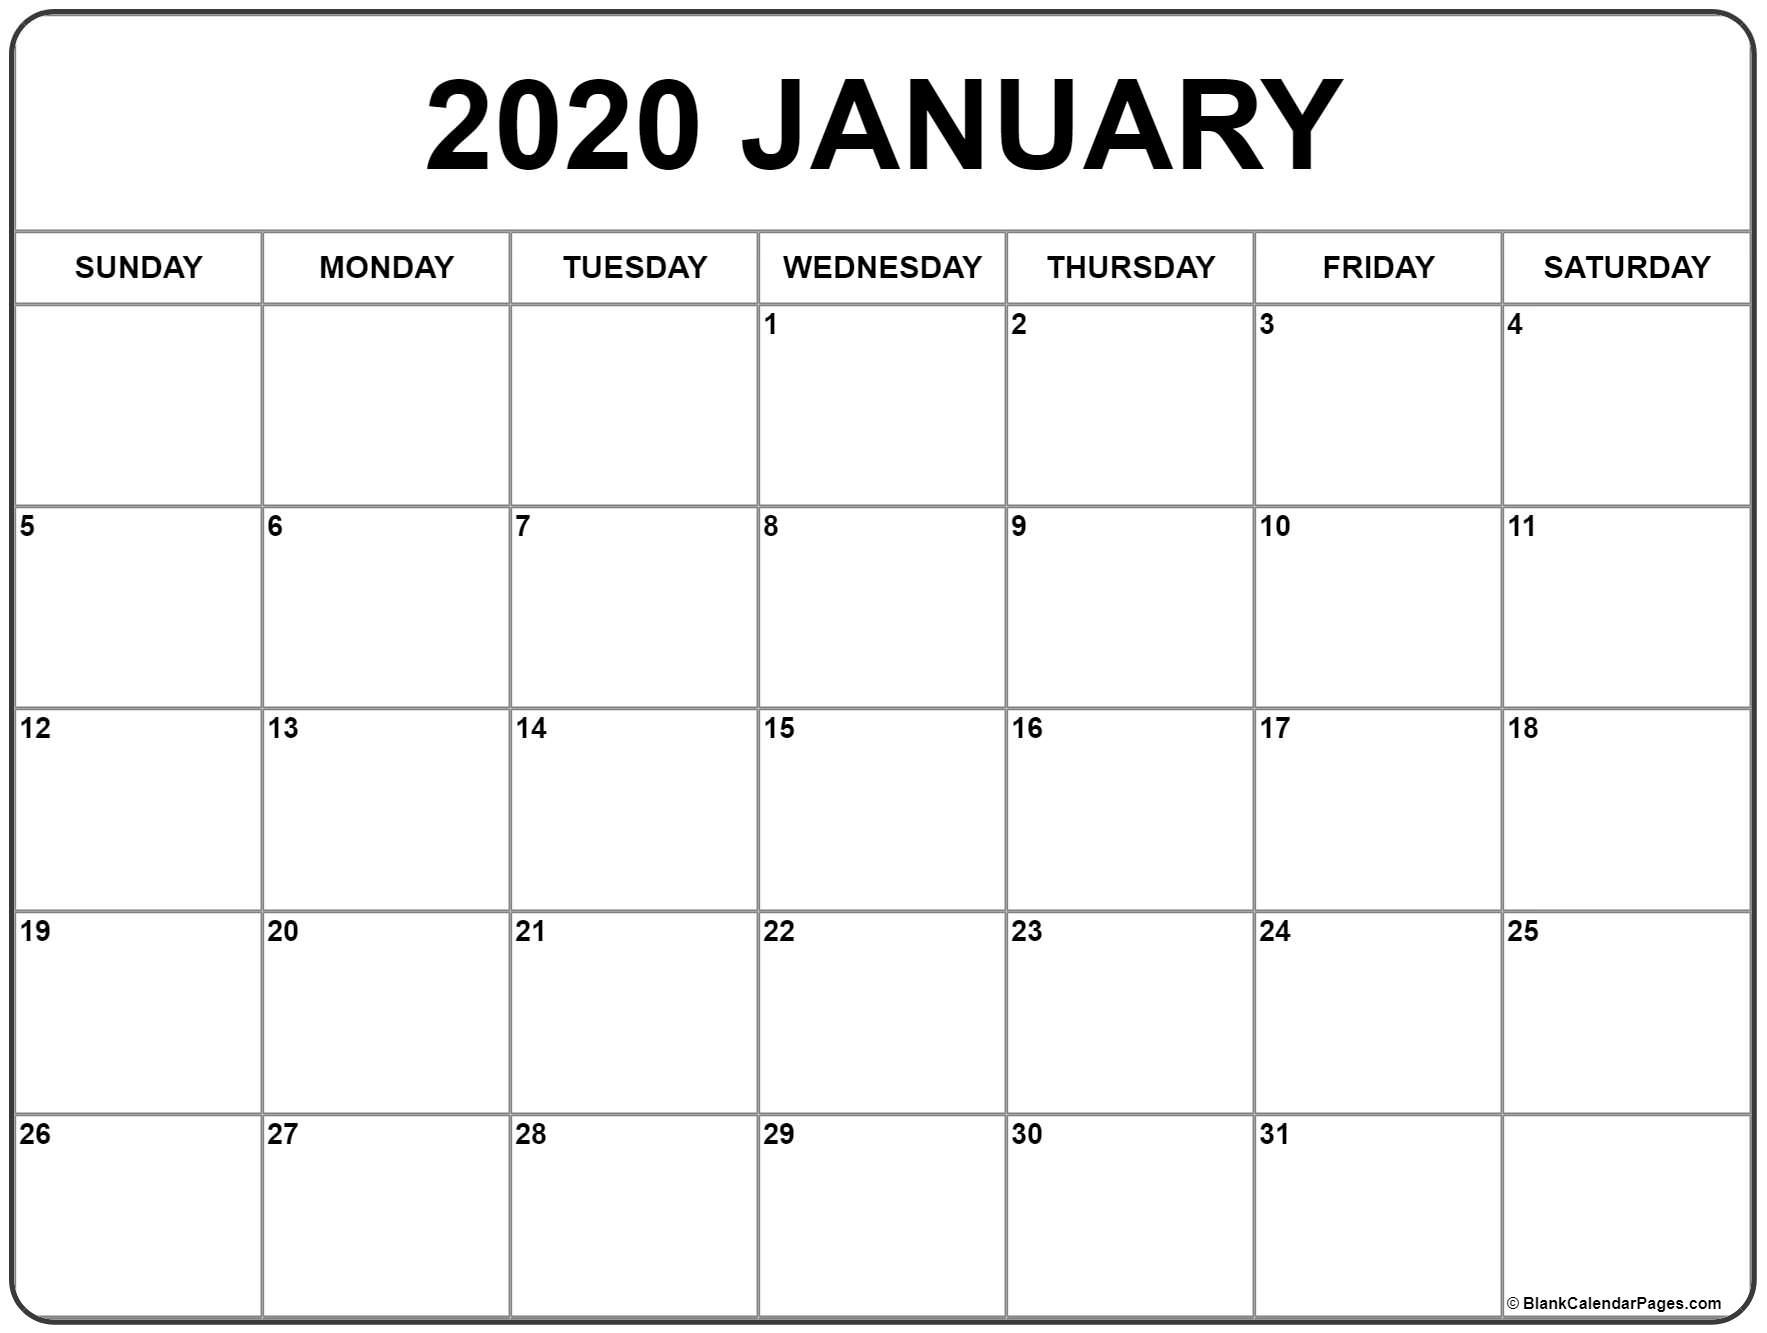 Get 2020 Printable Calendar With Large Squares | Calendar Printables in Downloaded Calendar With Large Squares